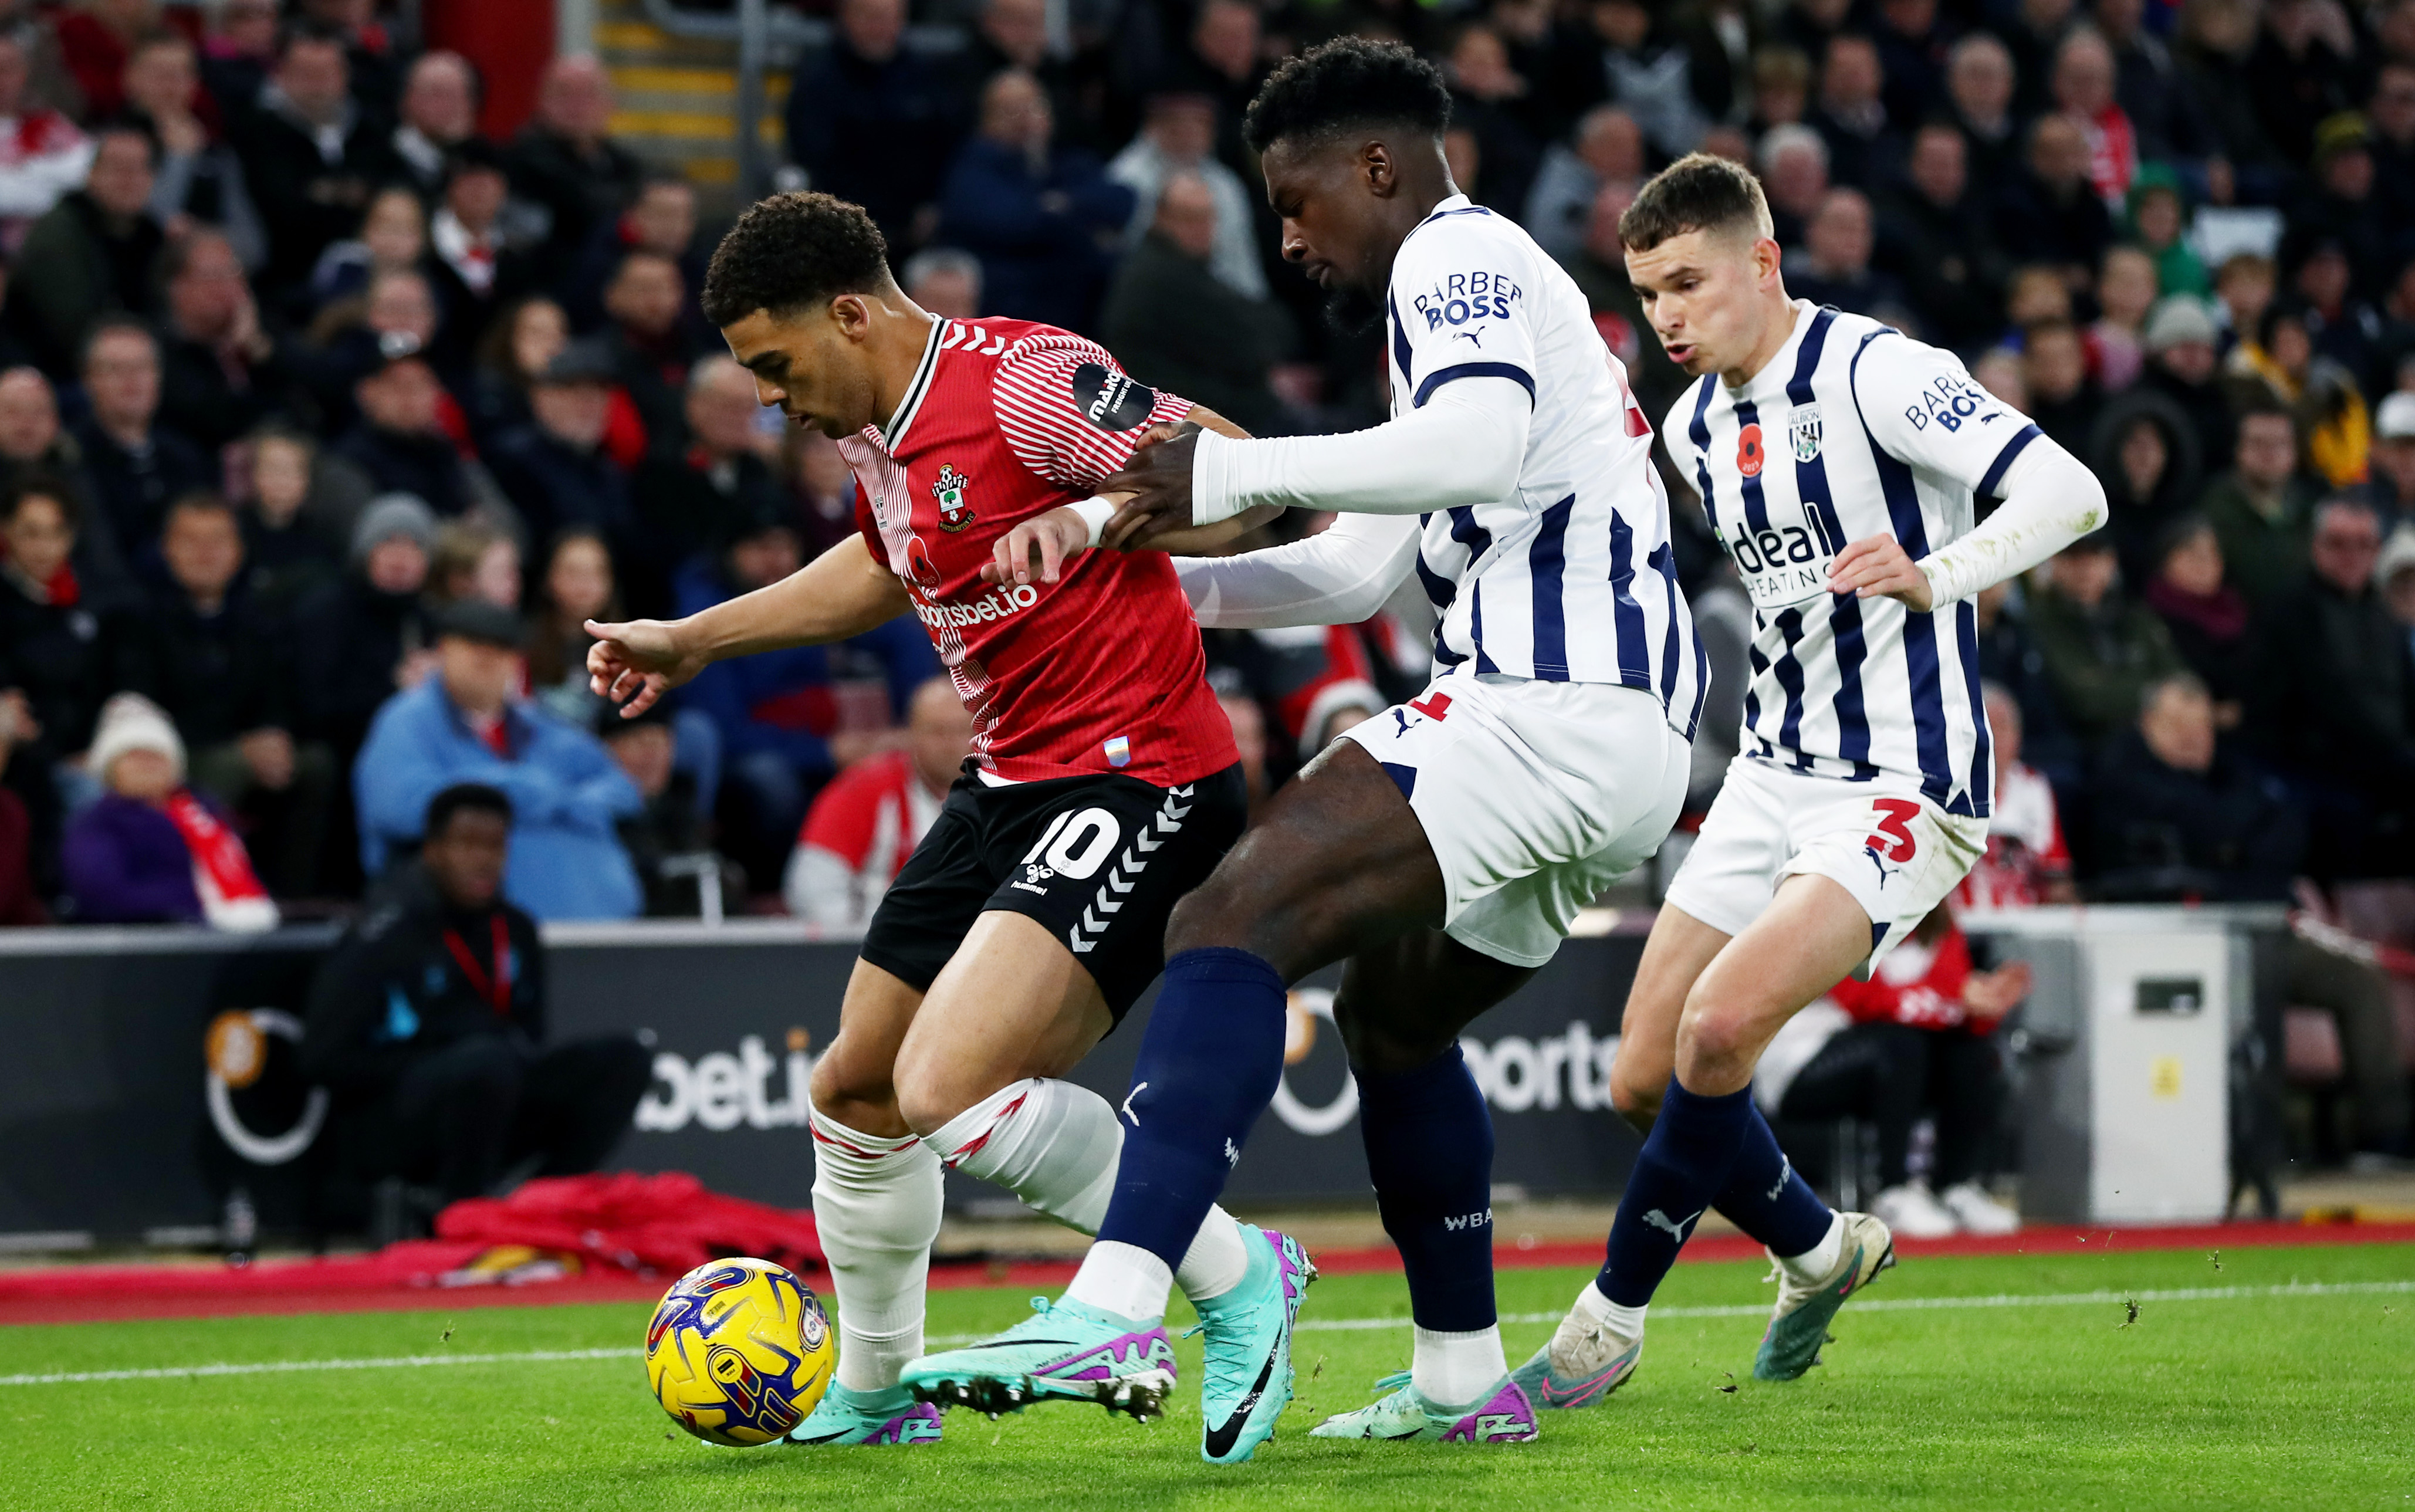 Cedric Kipre and Conor Townsend battle for the ball against Che Adams during Southampton's clash with Albion at St Mary's Stadium